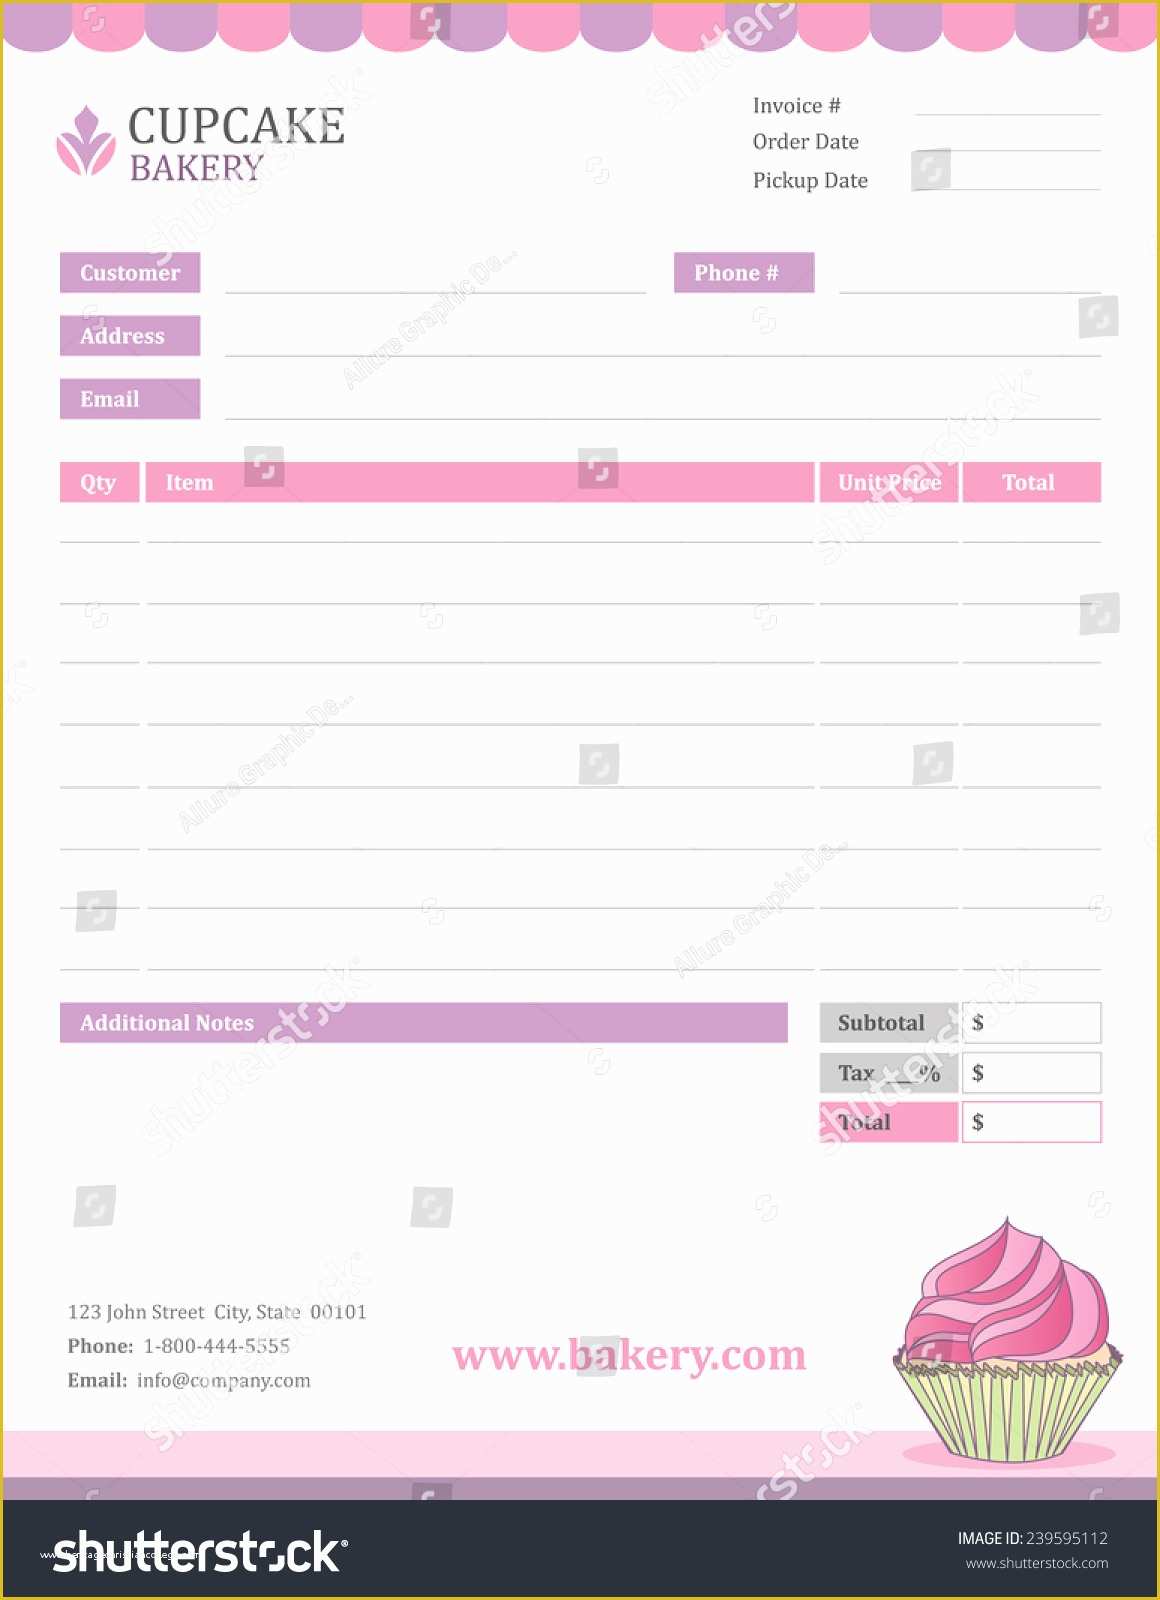 Free Bakery Invoice Template Word Of Example Bakery Invoice